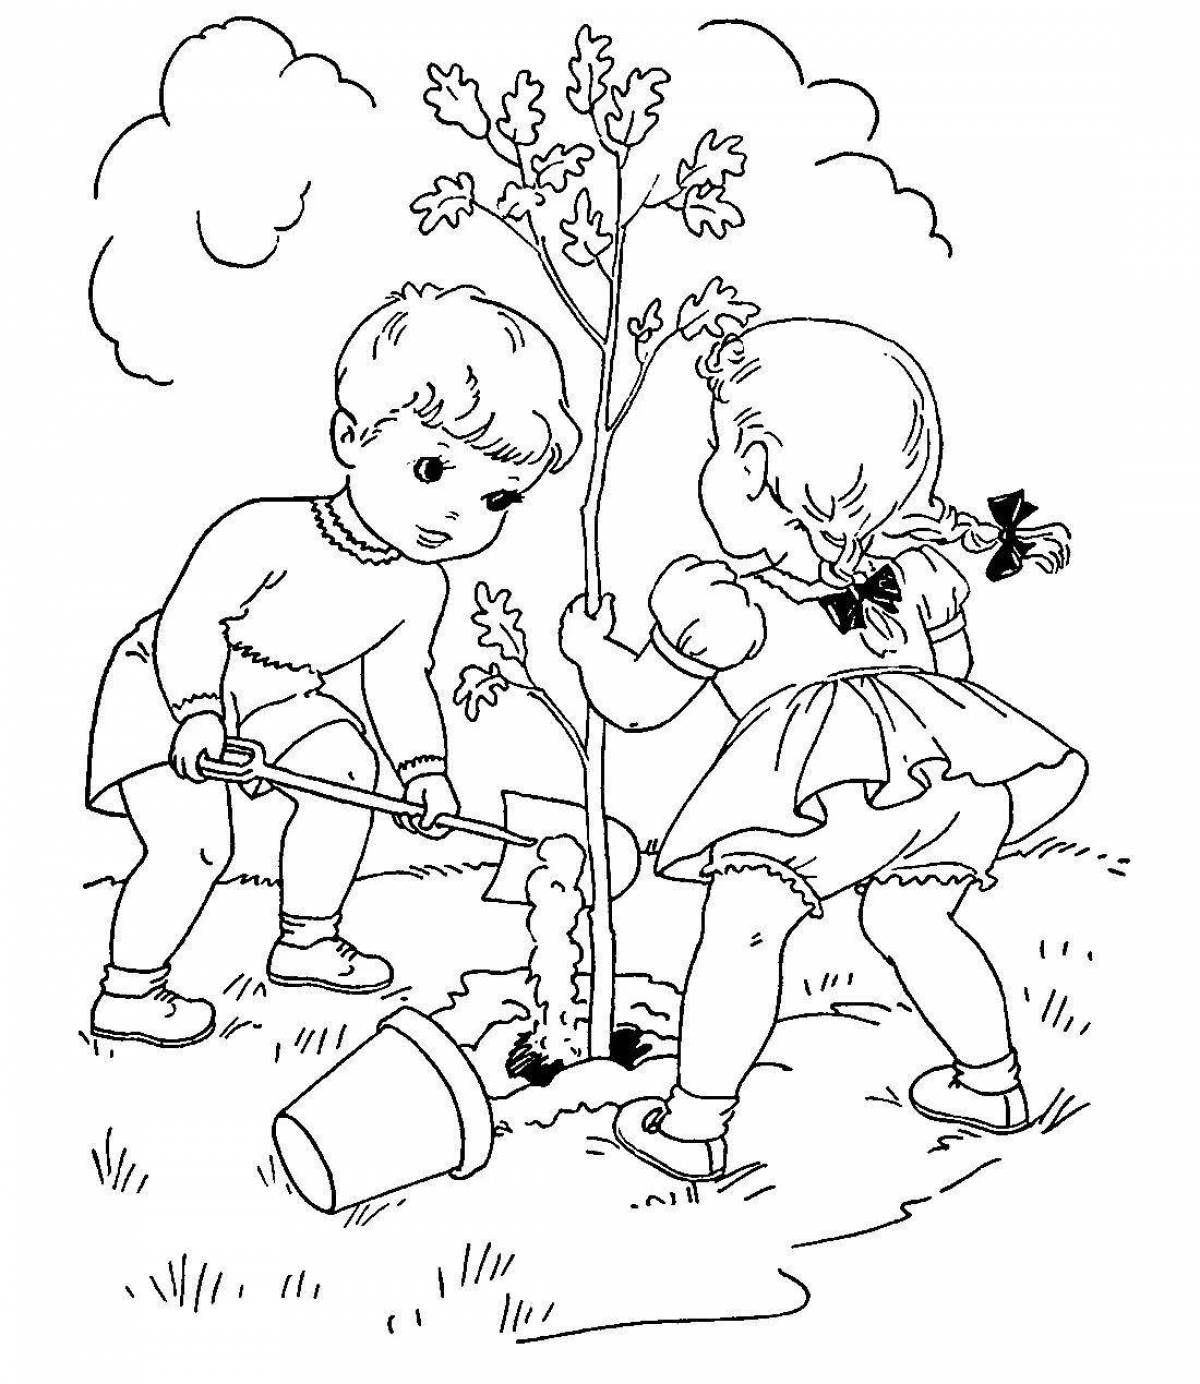 Adorable ecological coloring book for preschoolers